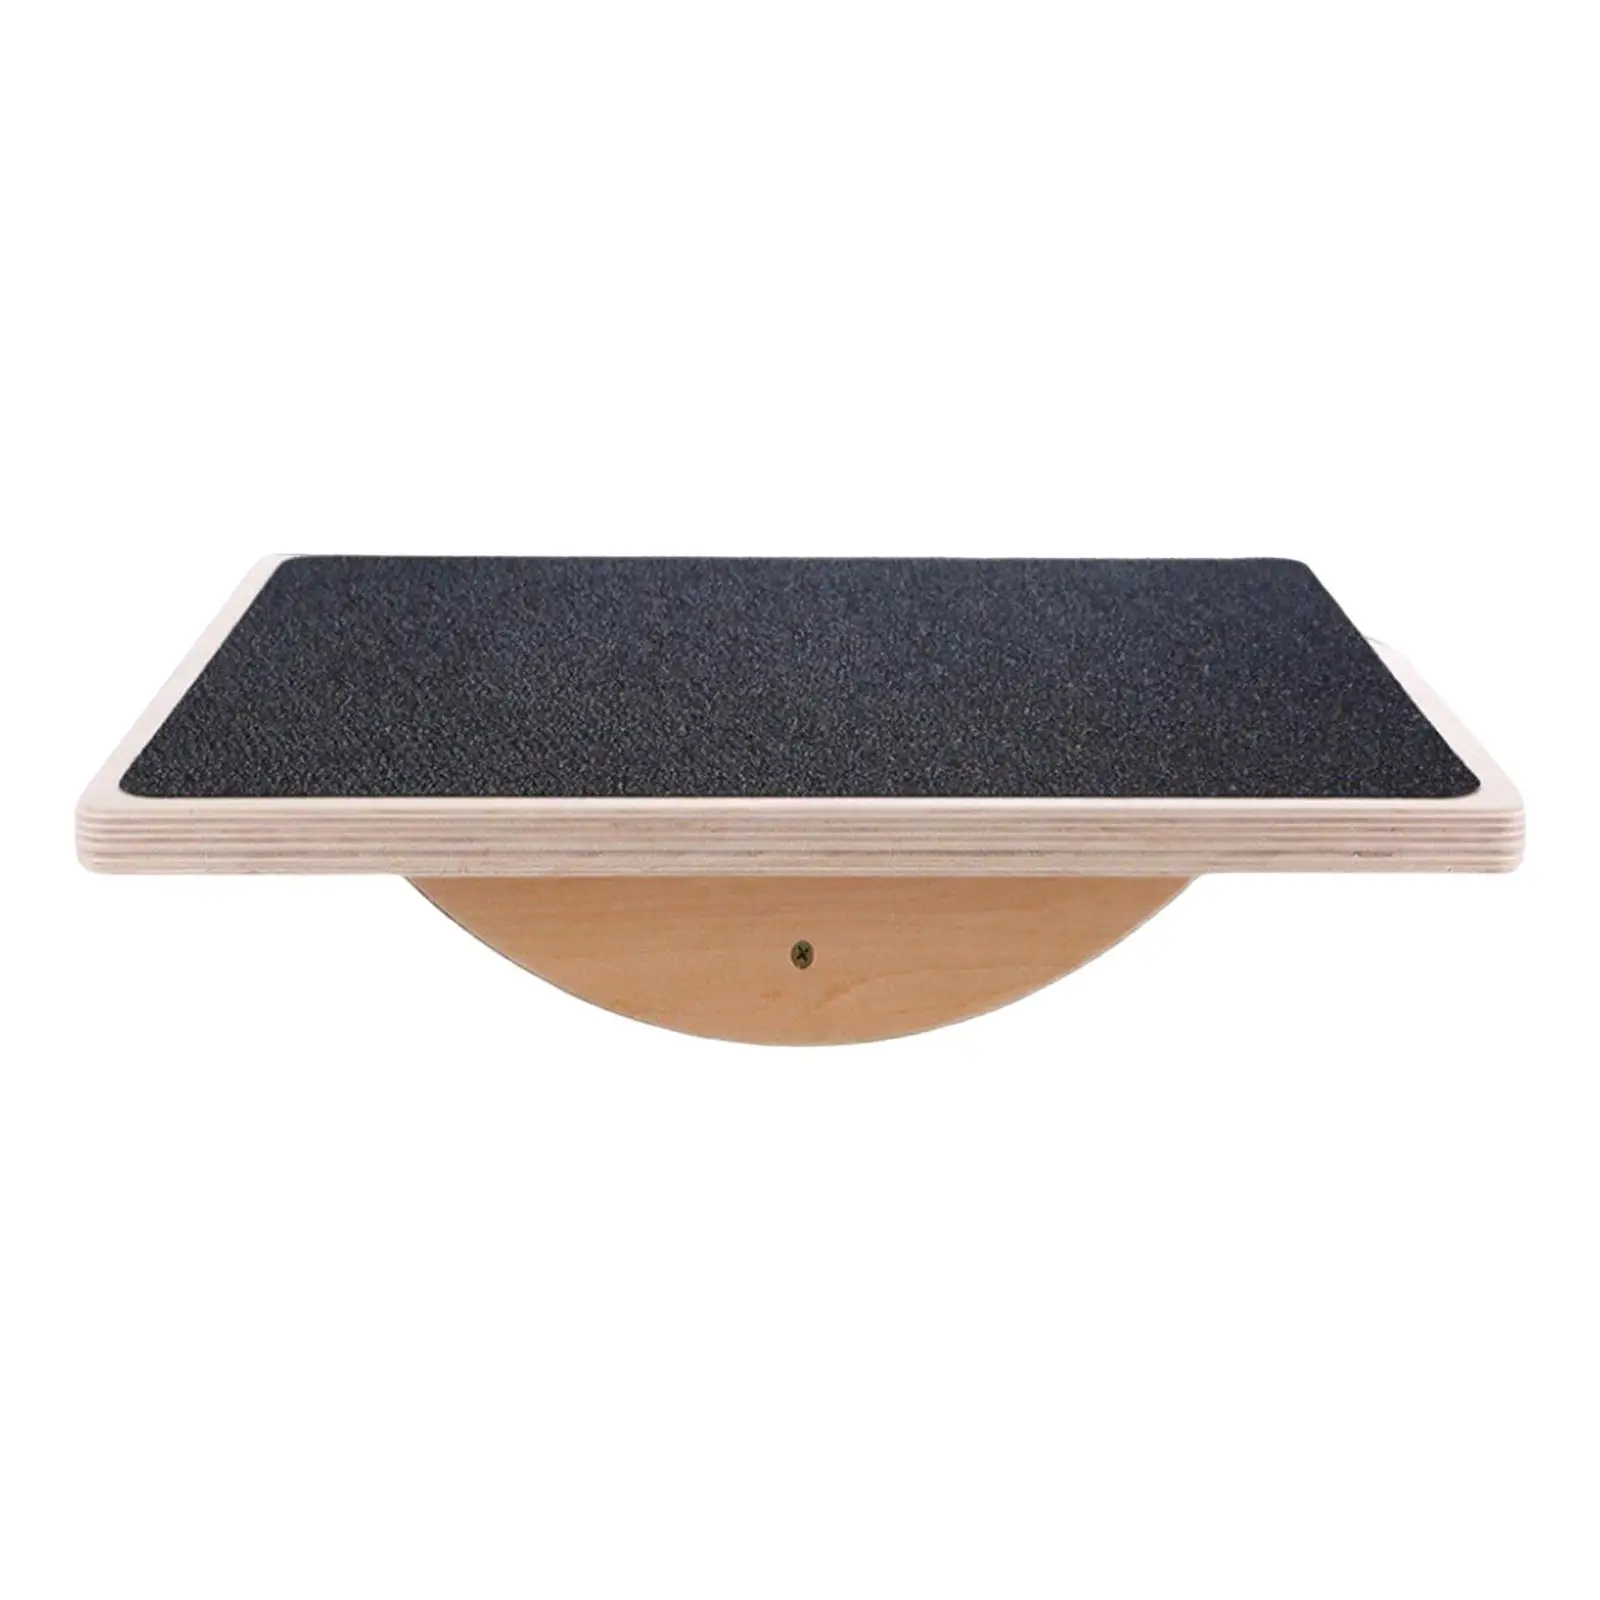 yoga balancing Board Waist Twisting Disc Accessories Standing Exercise Fitness